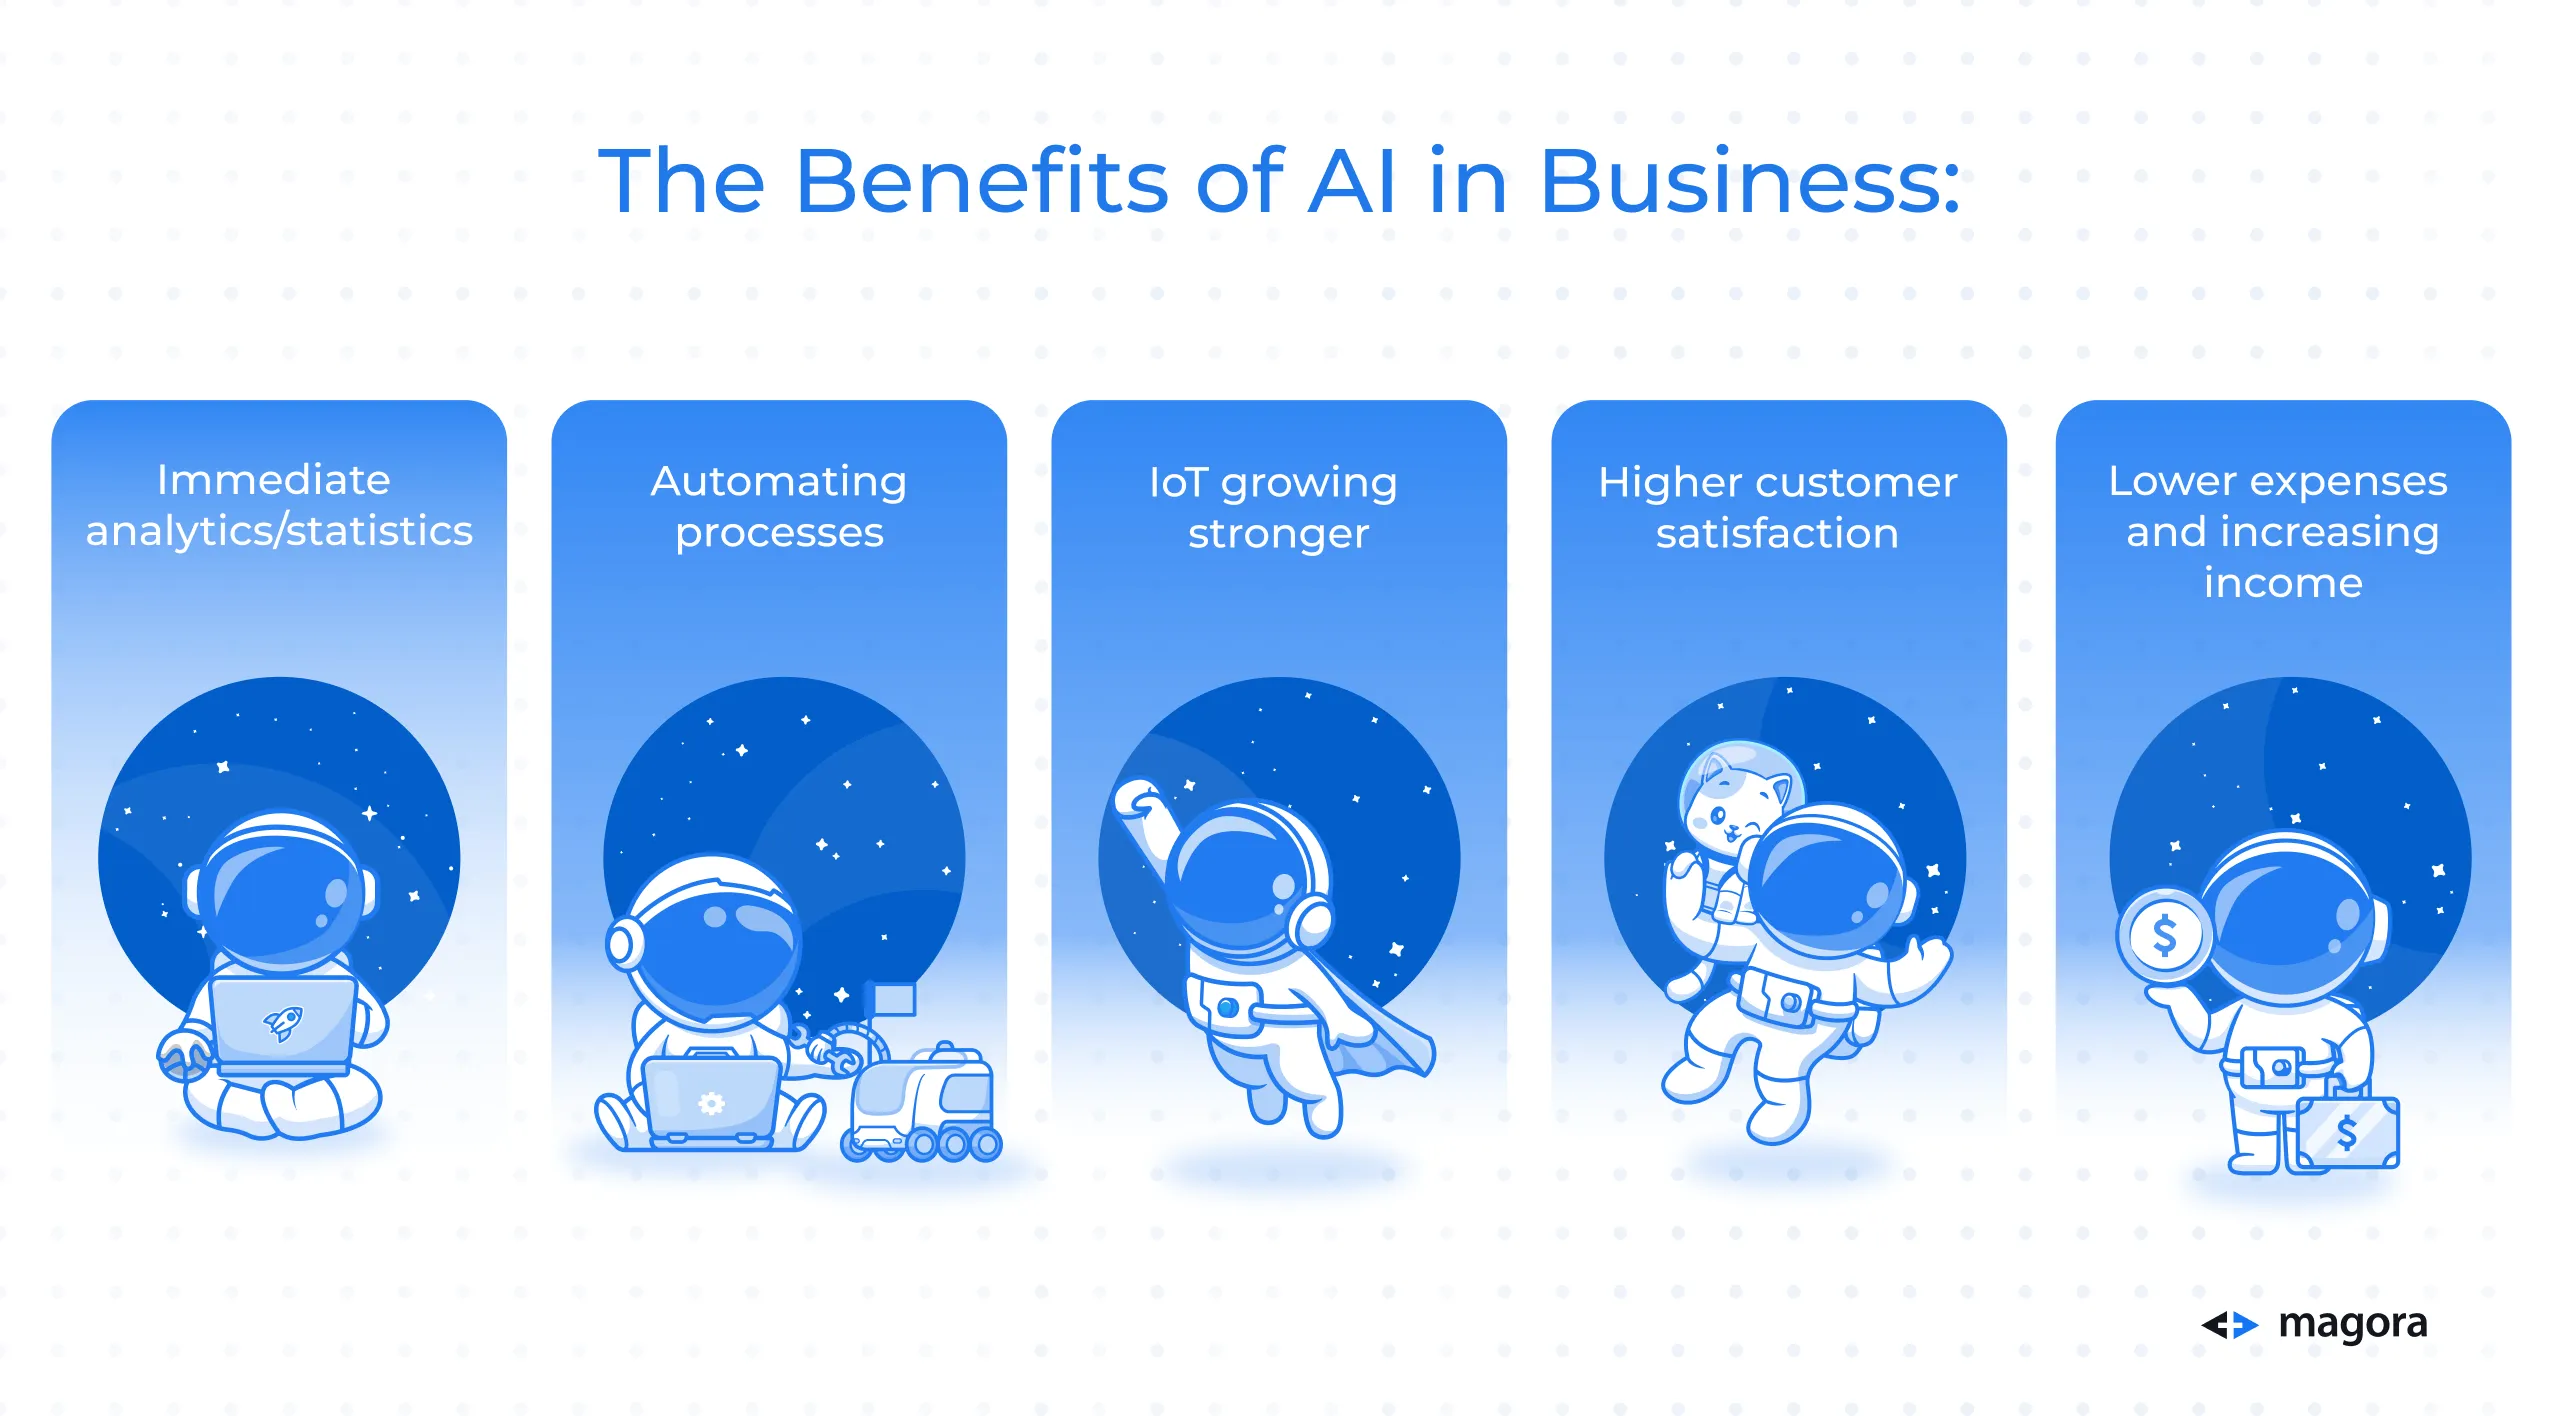 The Benefits of AI in Business